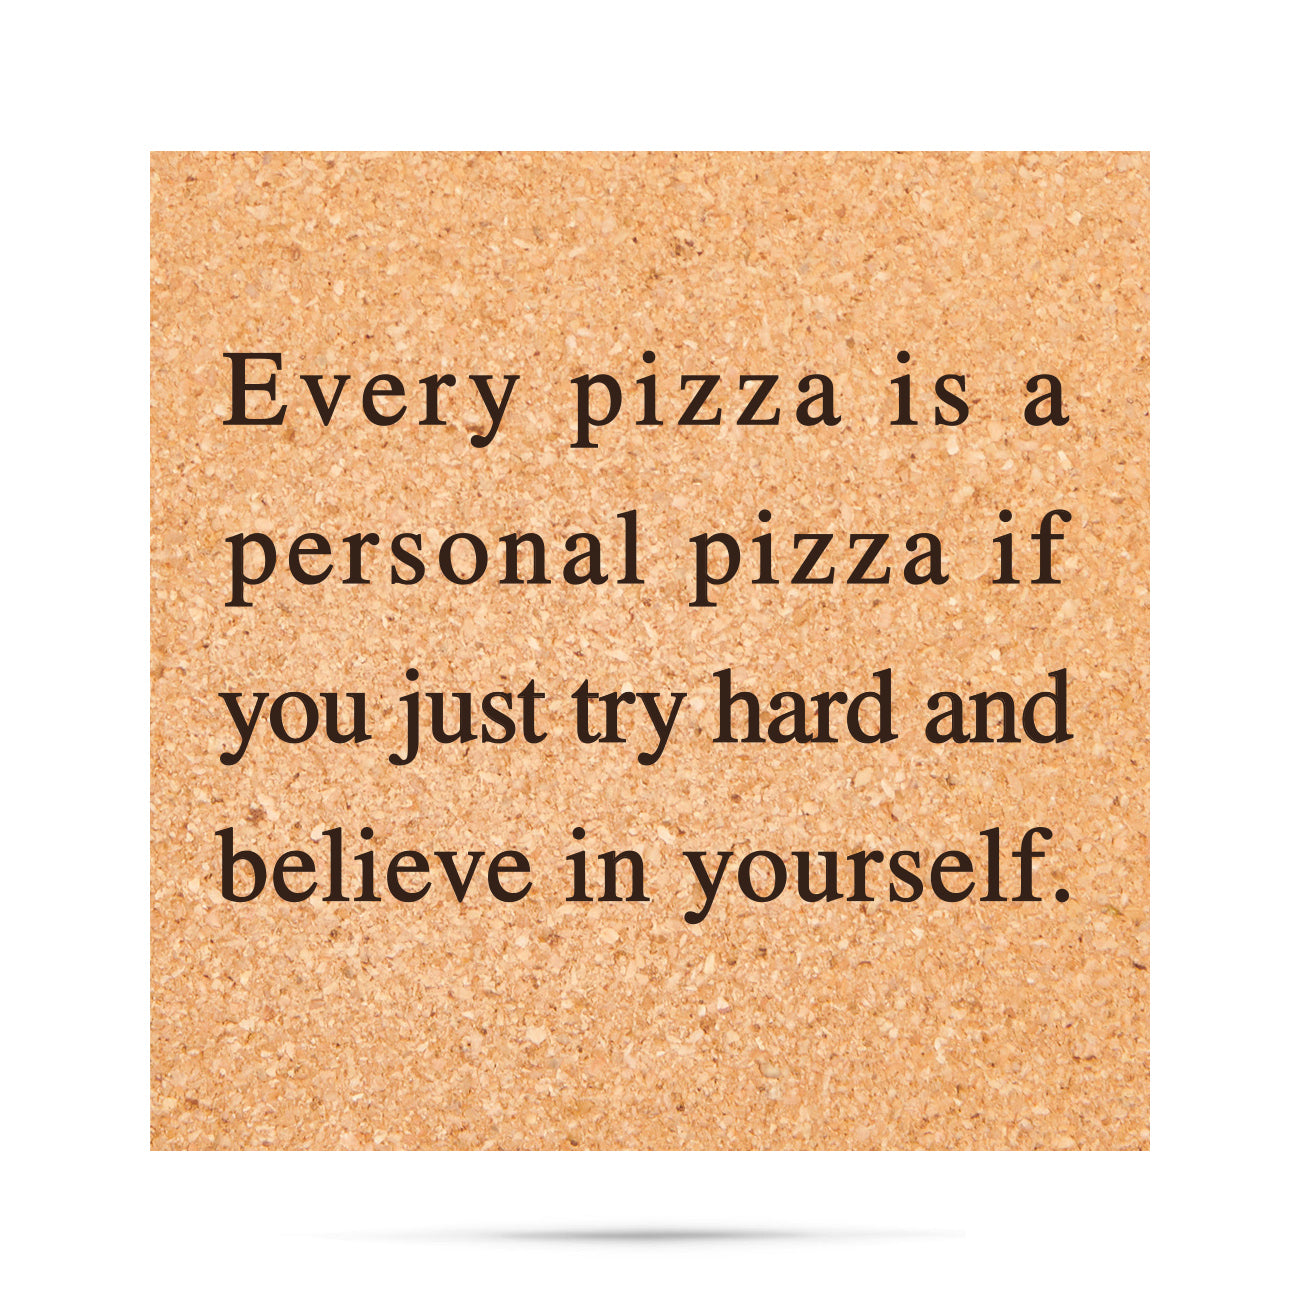 every pizza is a personal pizza if you just try hard and believe in yourself Cork Coaster